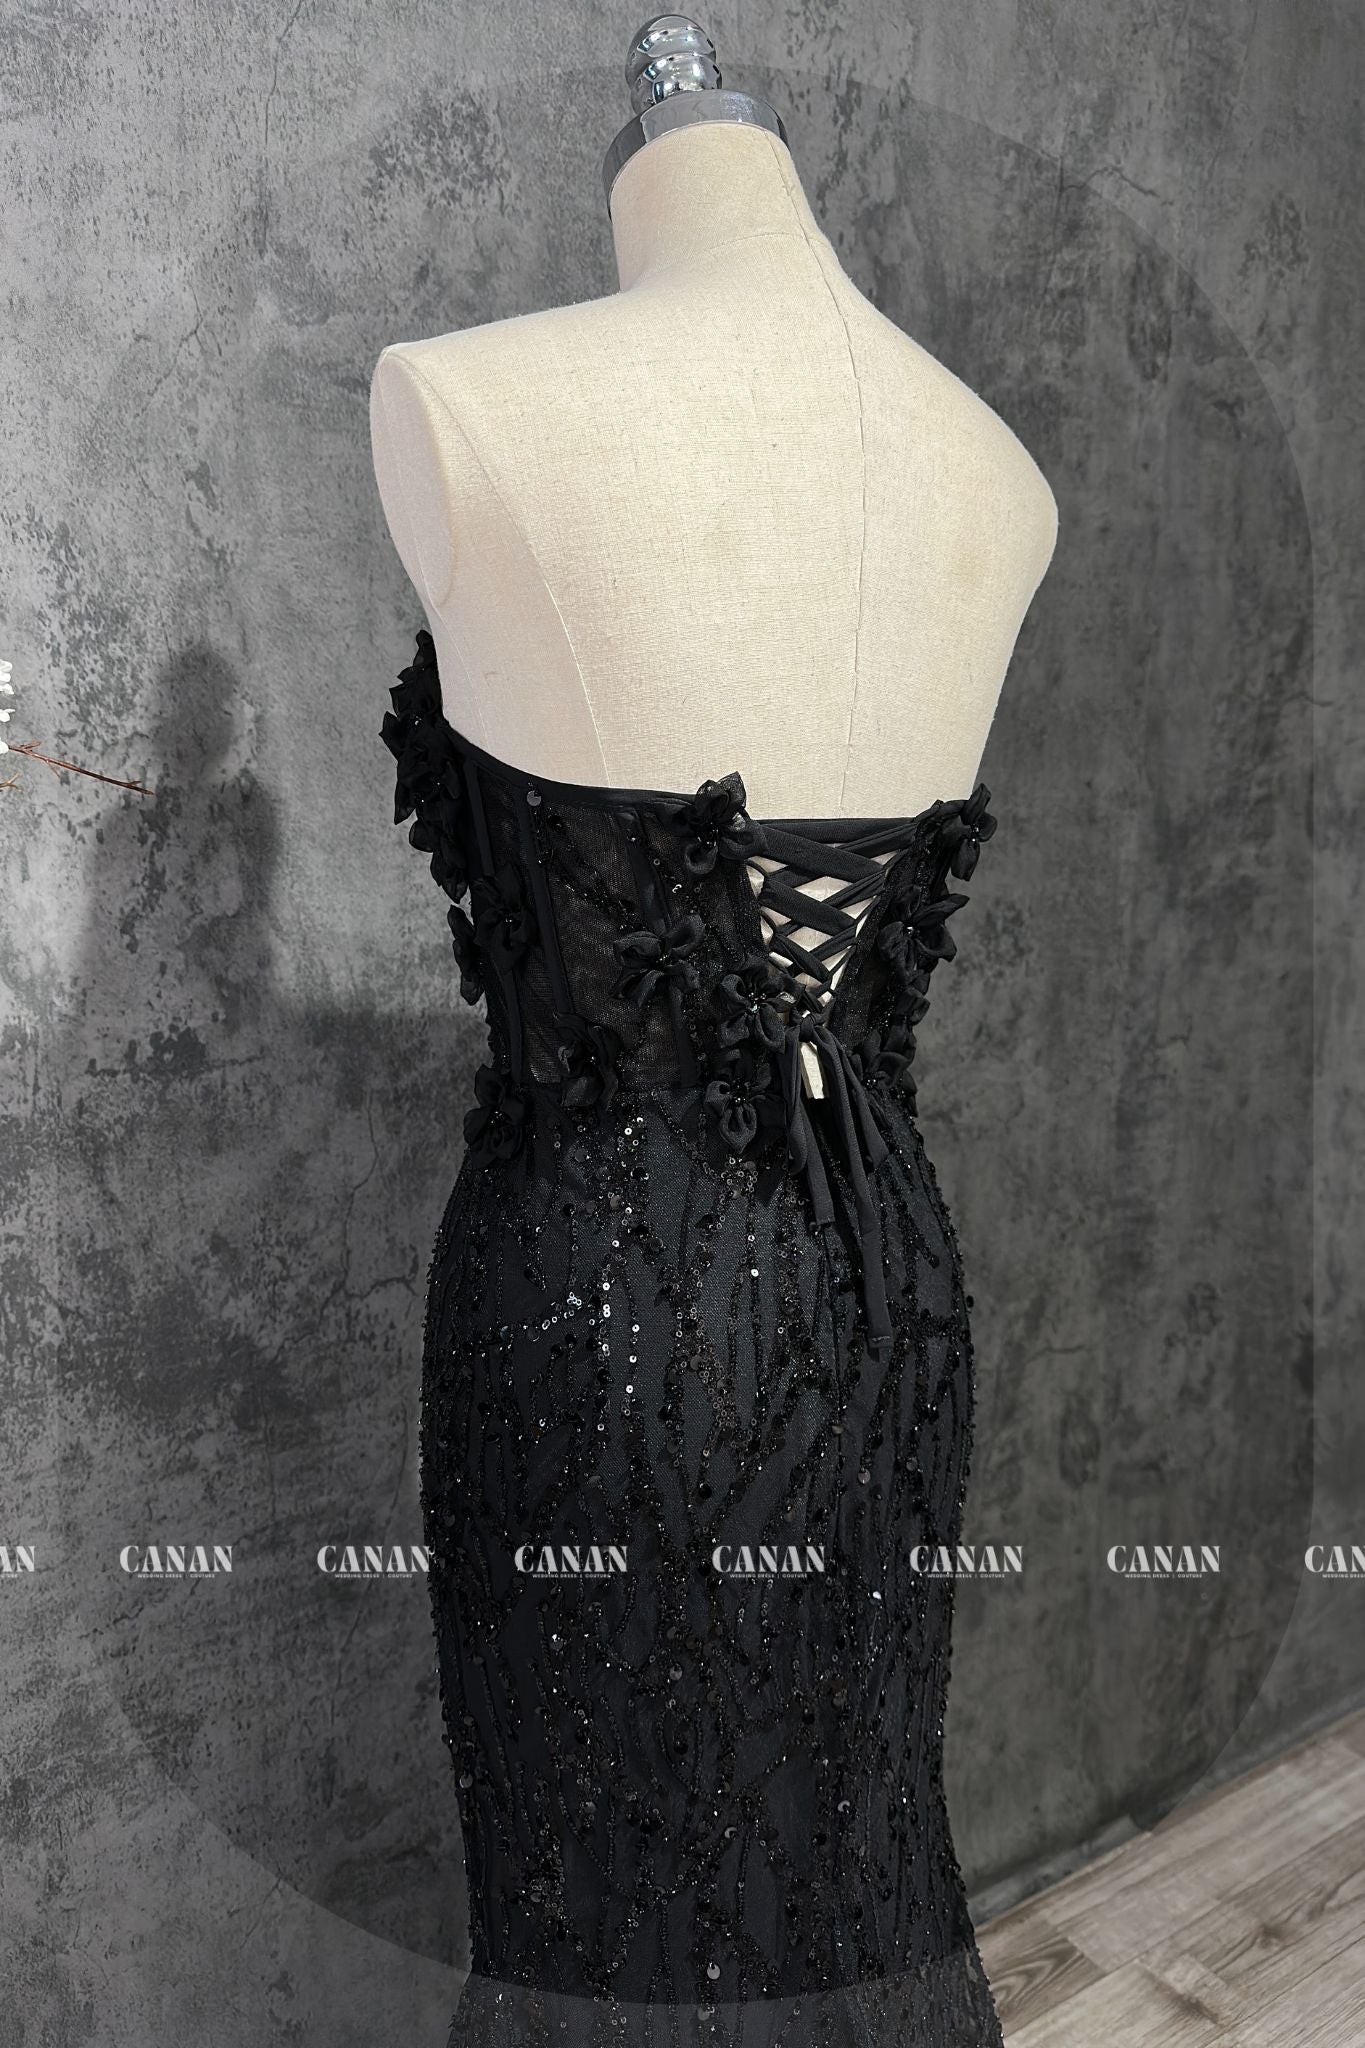 Elegant Black Sleeveless Corset Evening Dress: Sparkling Gown for Special Occasions